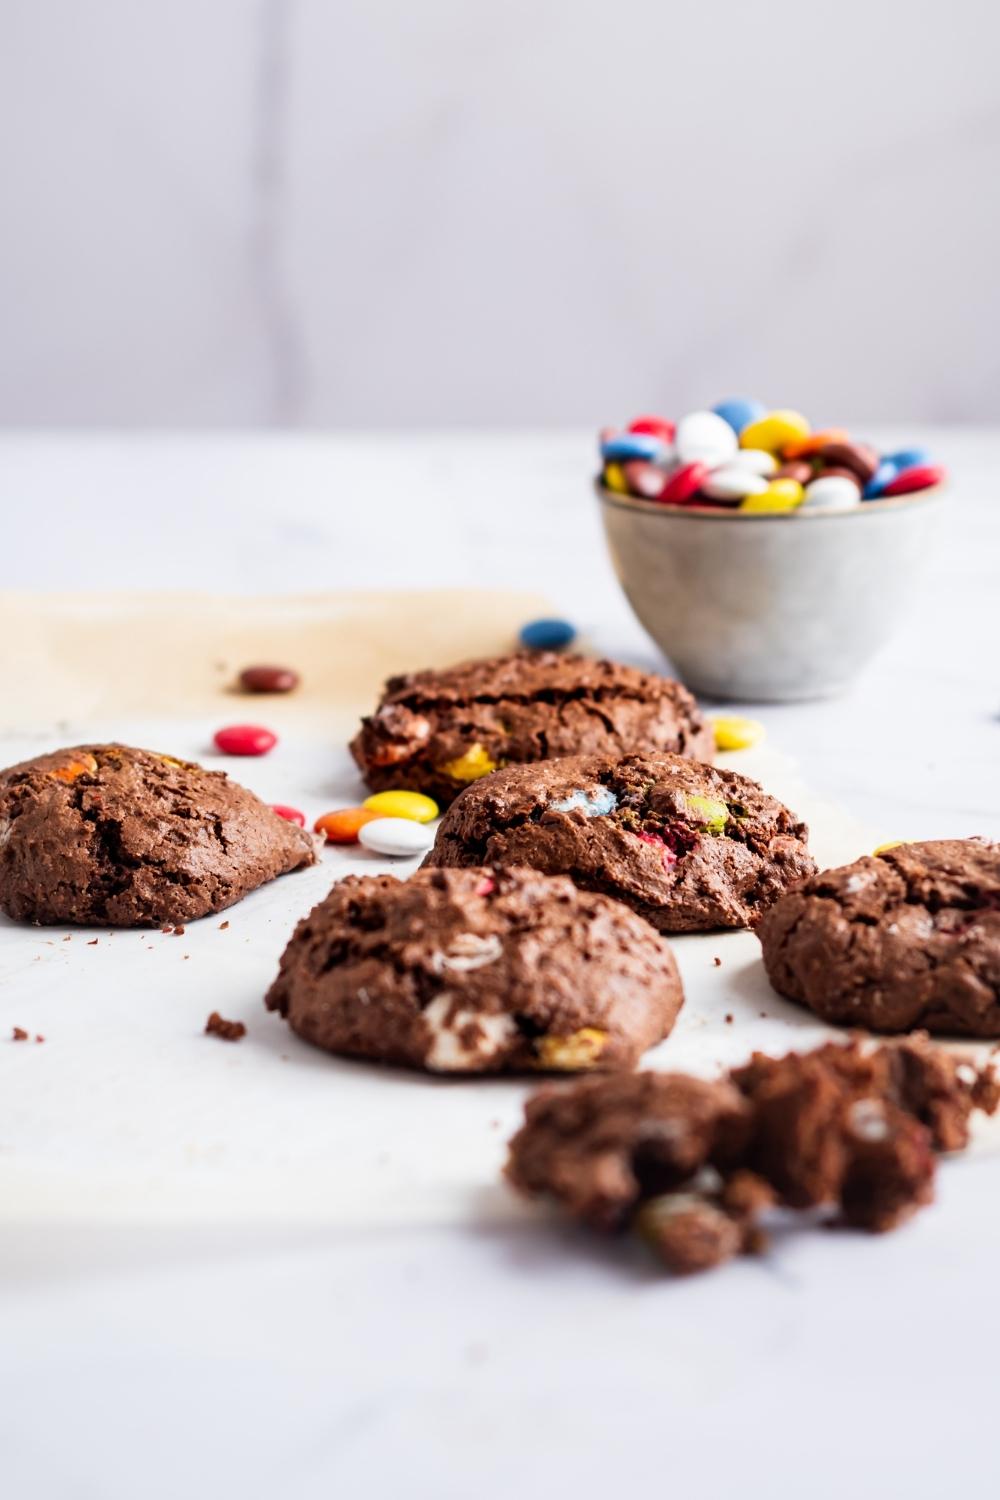 Five chocolate cake mix cookies in front of a bowl of m&ms.